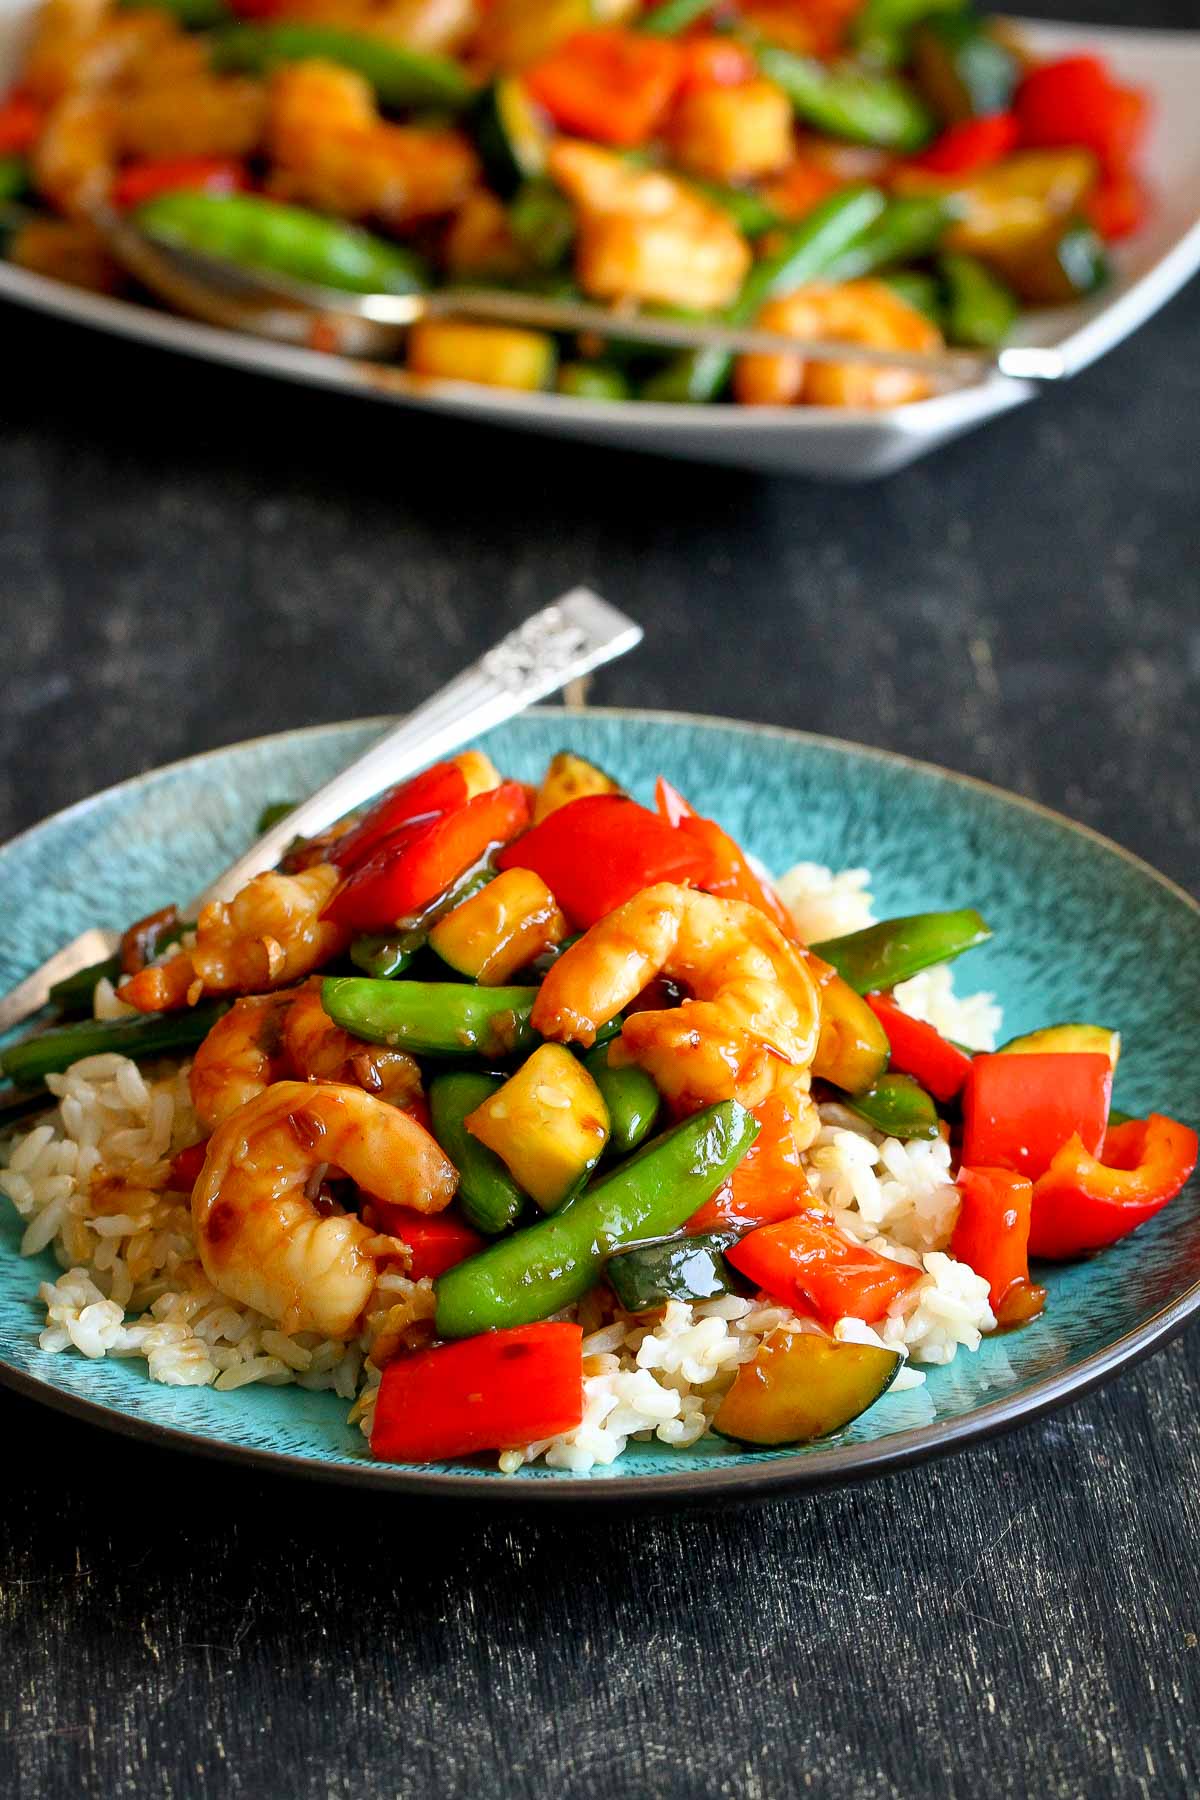 This shrimp and vegetable stir fry recipe can be whipped up in minutes. Toss it with an easy stir fry sauce and serve it over a bed of rice. 171 calories and 3 Weight Watchers SP | Recipes easy | Recipes healthy | With noodles | With rice